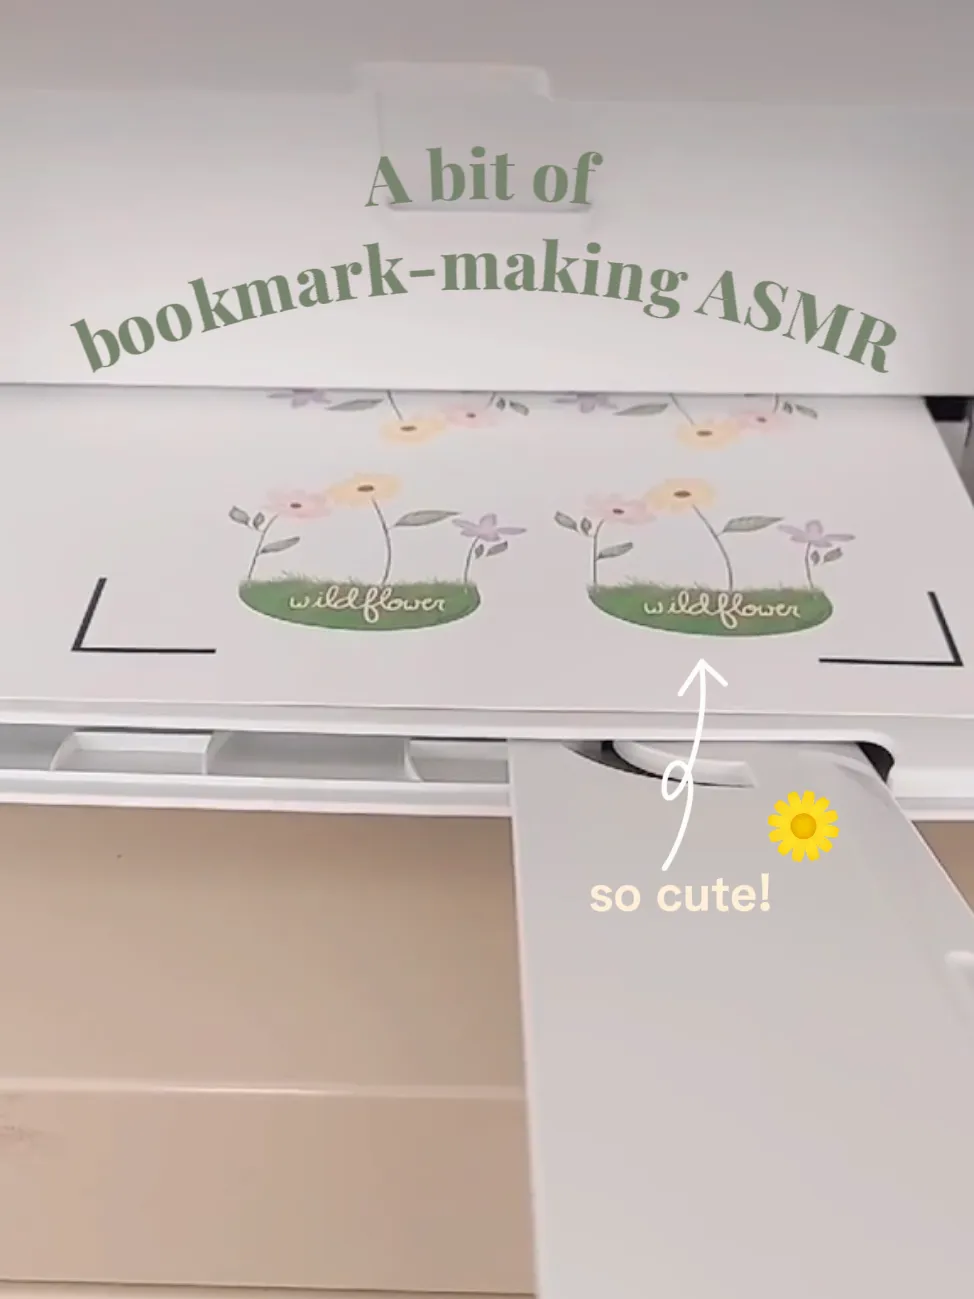 Some Bookmark-making ASMR For You!, Video published by storyknits